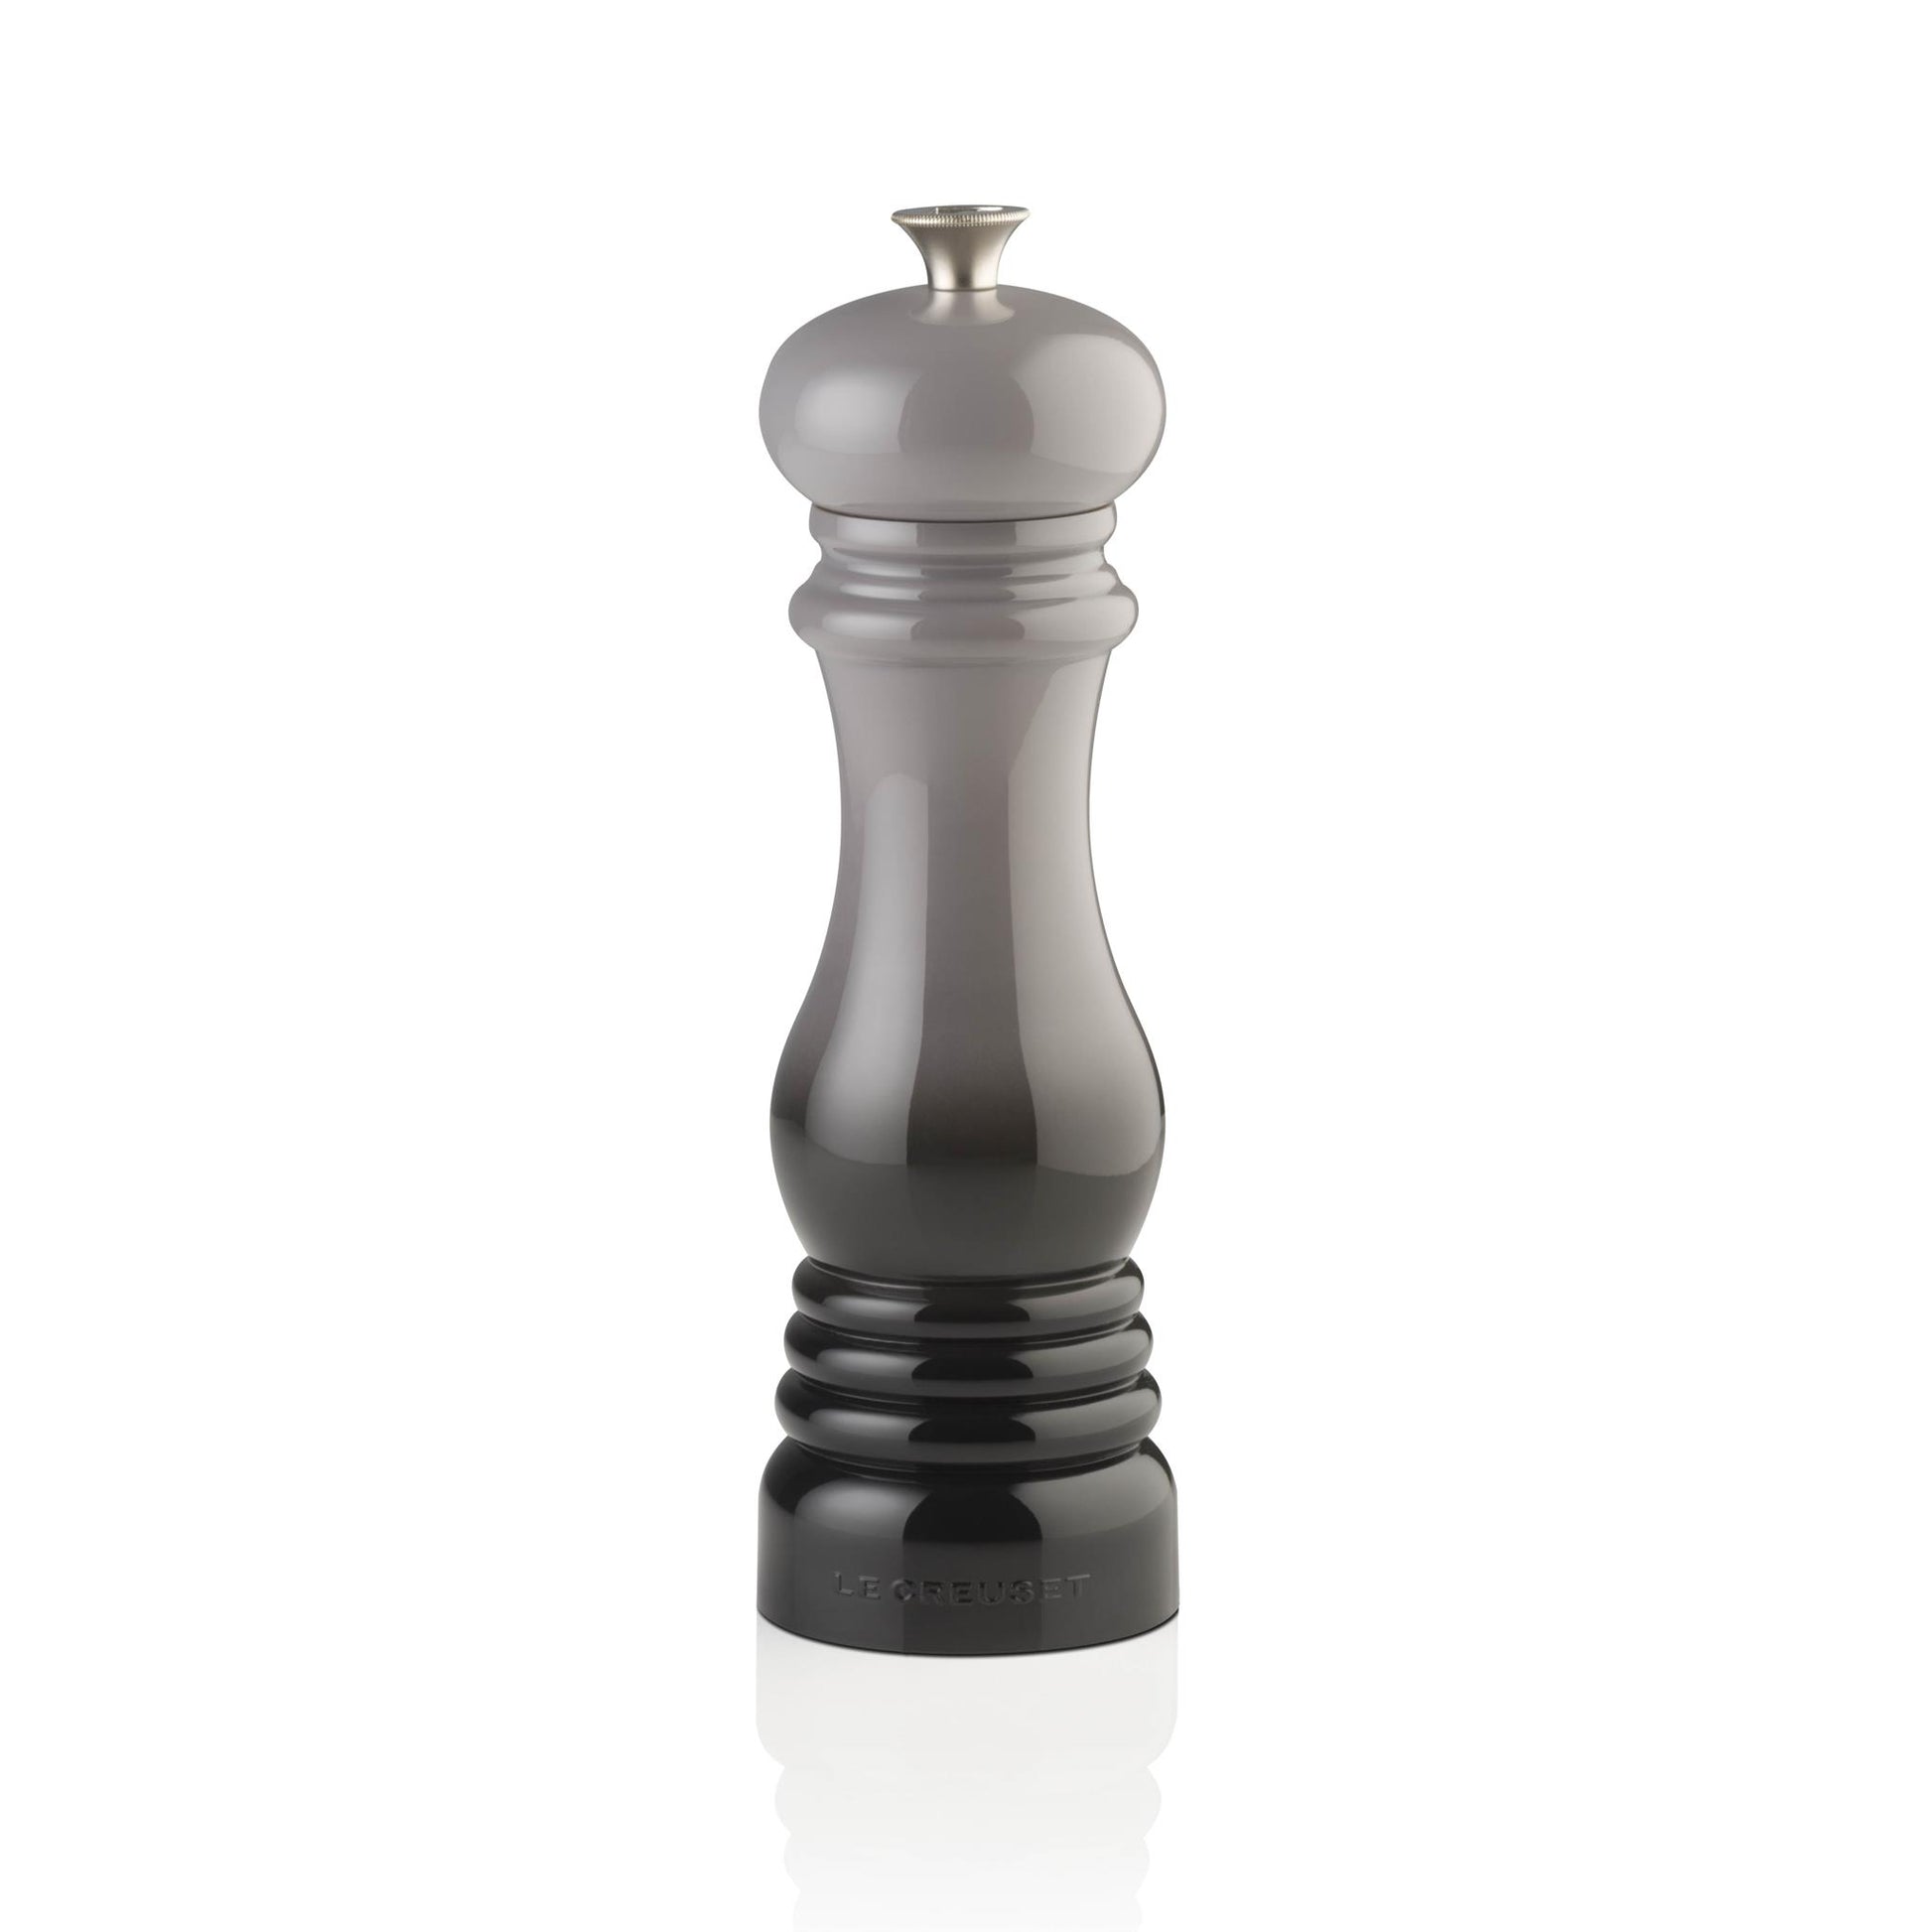 A pepper mill coloured in black and grey ombre with a classic curved design